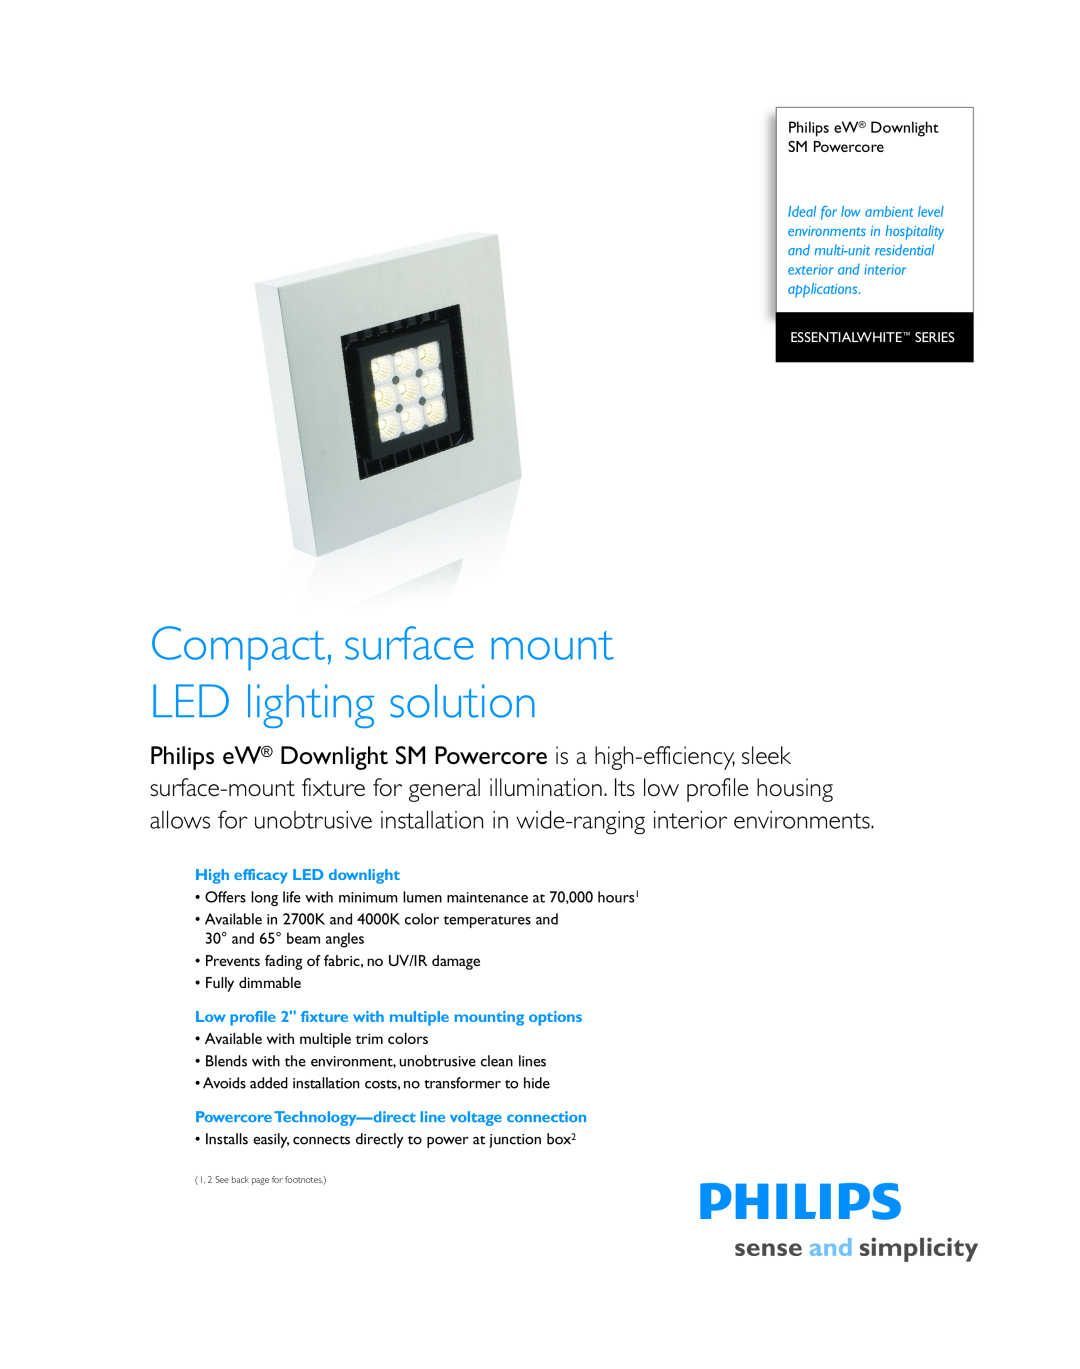 Philips P-5977 manual High efficacy LED downlight, PowercoreTechnology-directline voltageconnection 